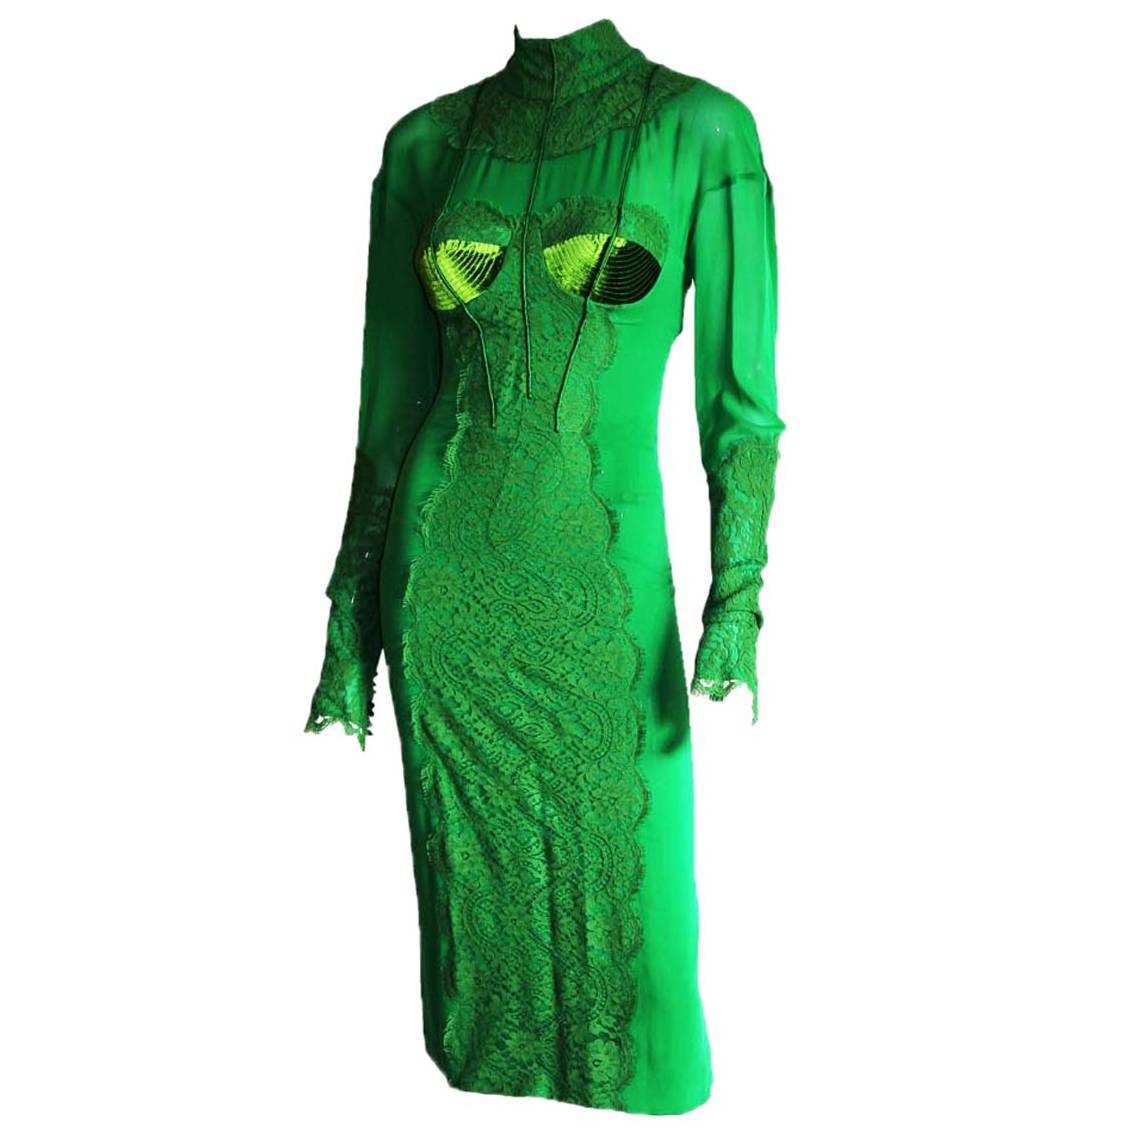 The Most Utterly Scrumptious Tom Ford FW 2011 Green Silk Lace & Velvet Dress! 42